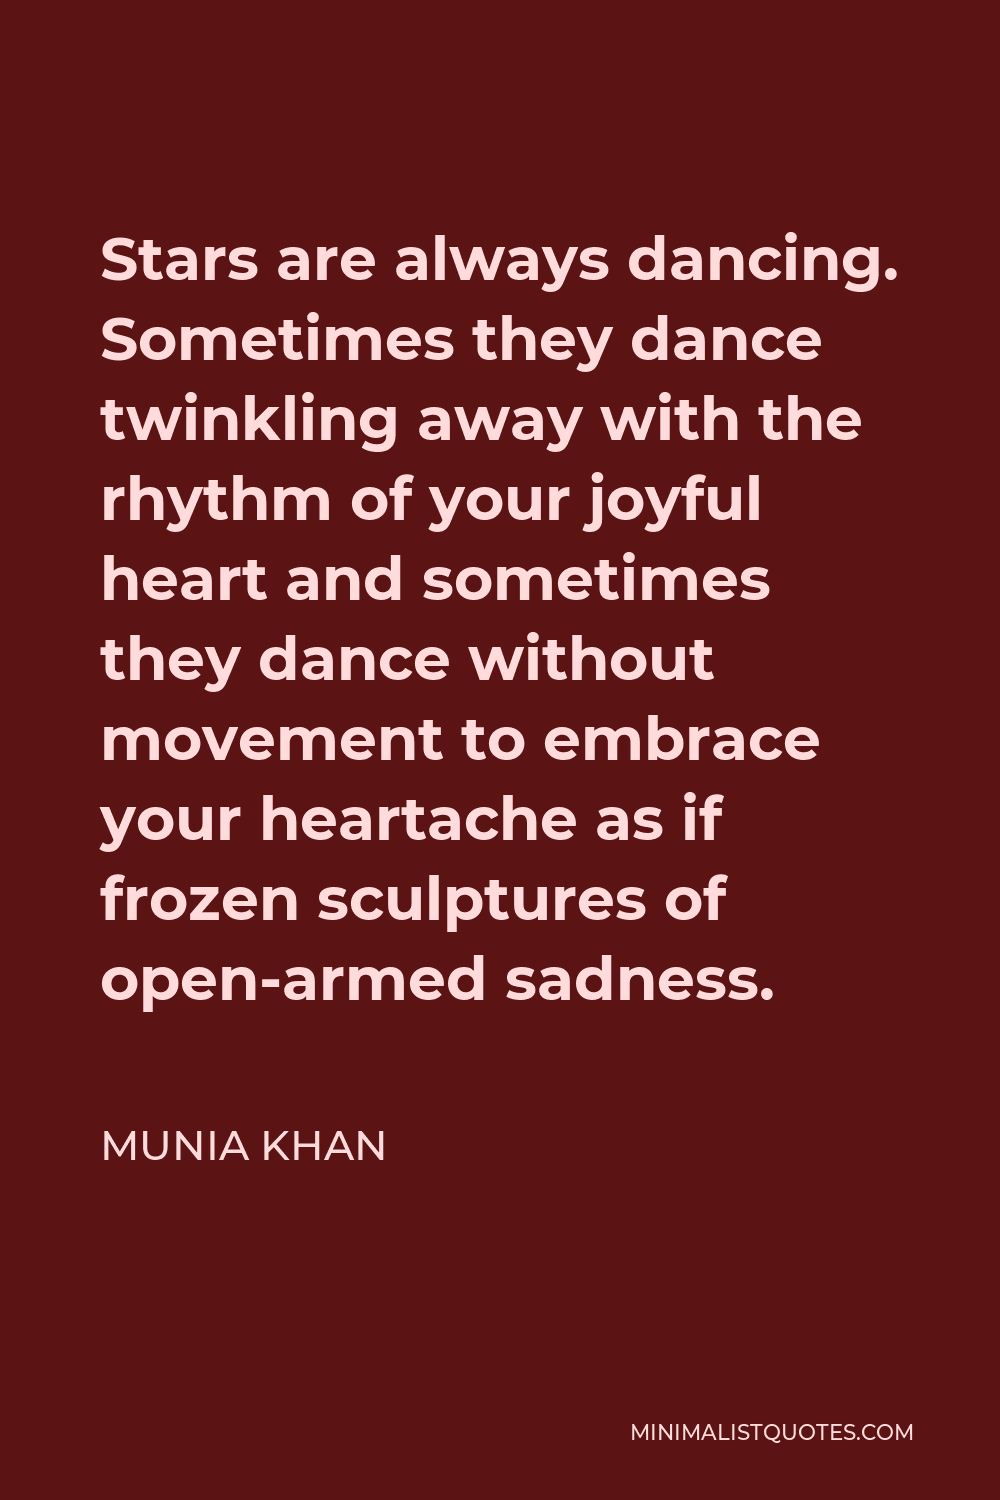 Munia Khan Quote - Stars are always dancing. Sometimes they dance twinkling away with the rhythm of your joyful heart and sometimes they dance without movement to embrace your heartache as if frozen sculptures of open-armed sadness.